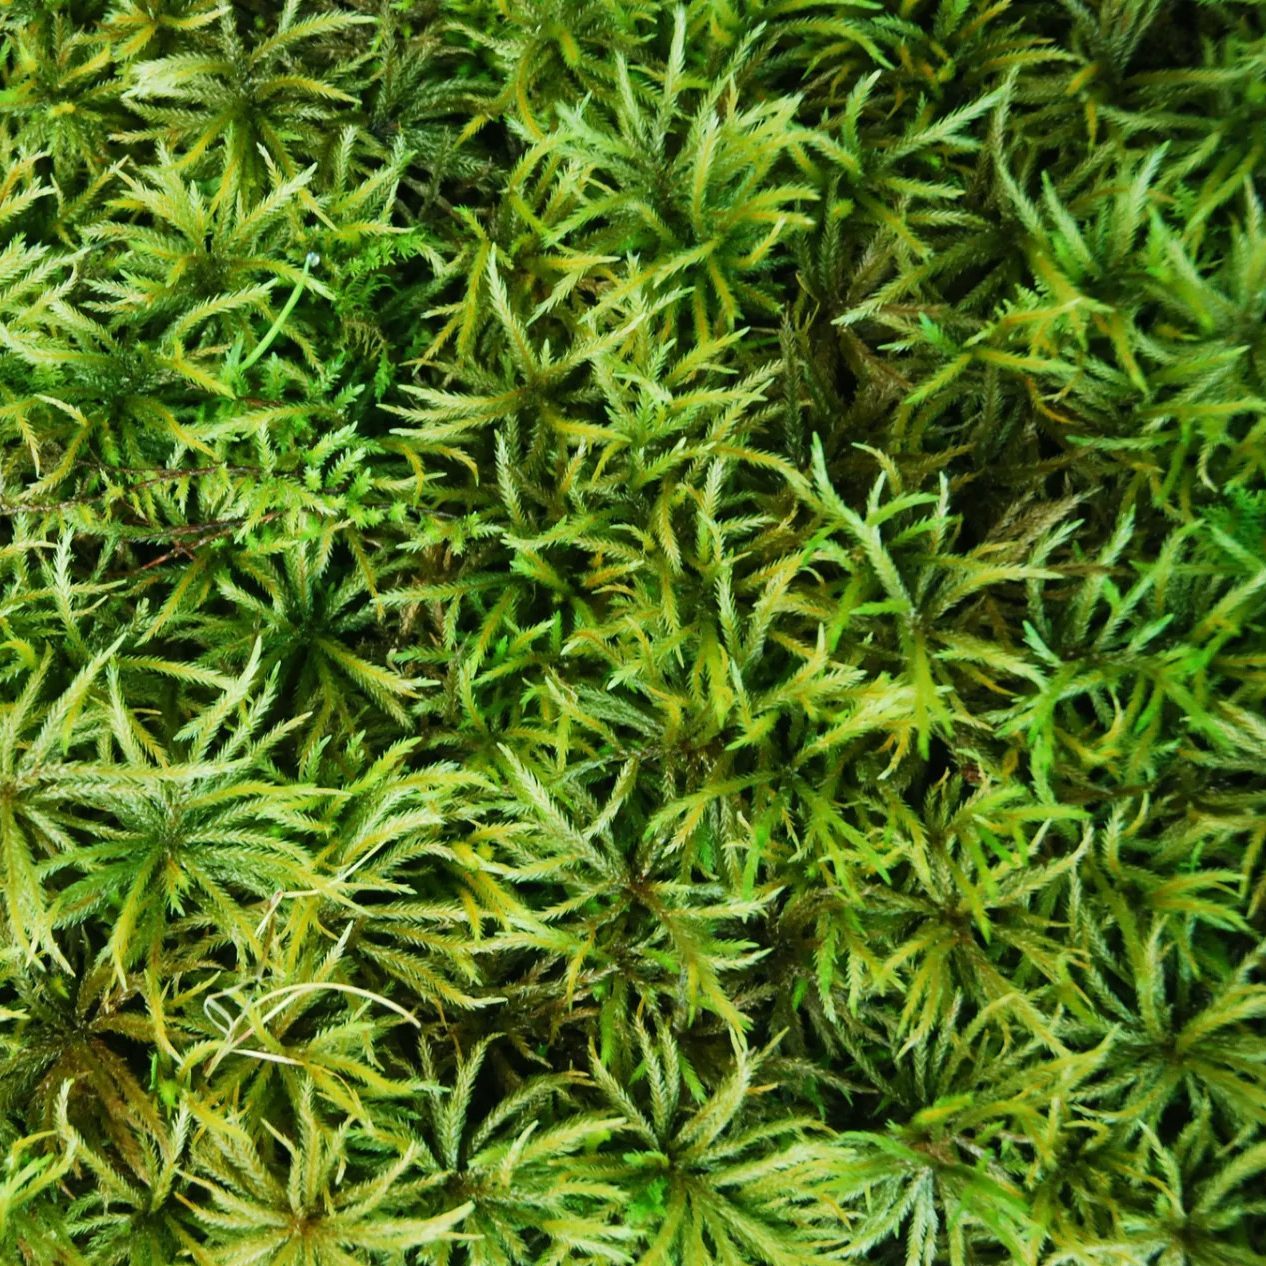 Mountain Moss -- Experts in Moss Landscaping – MountainMoss